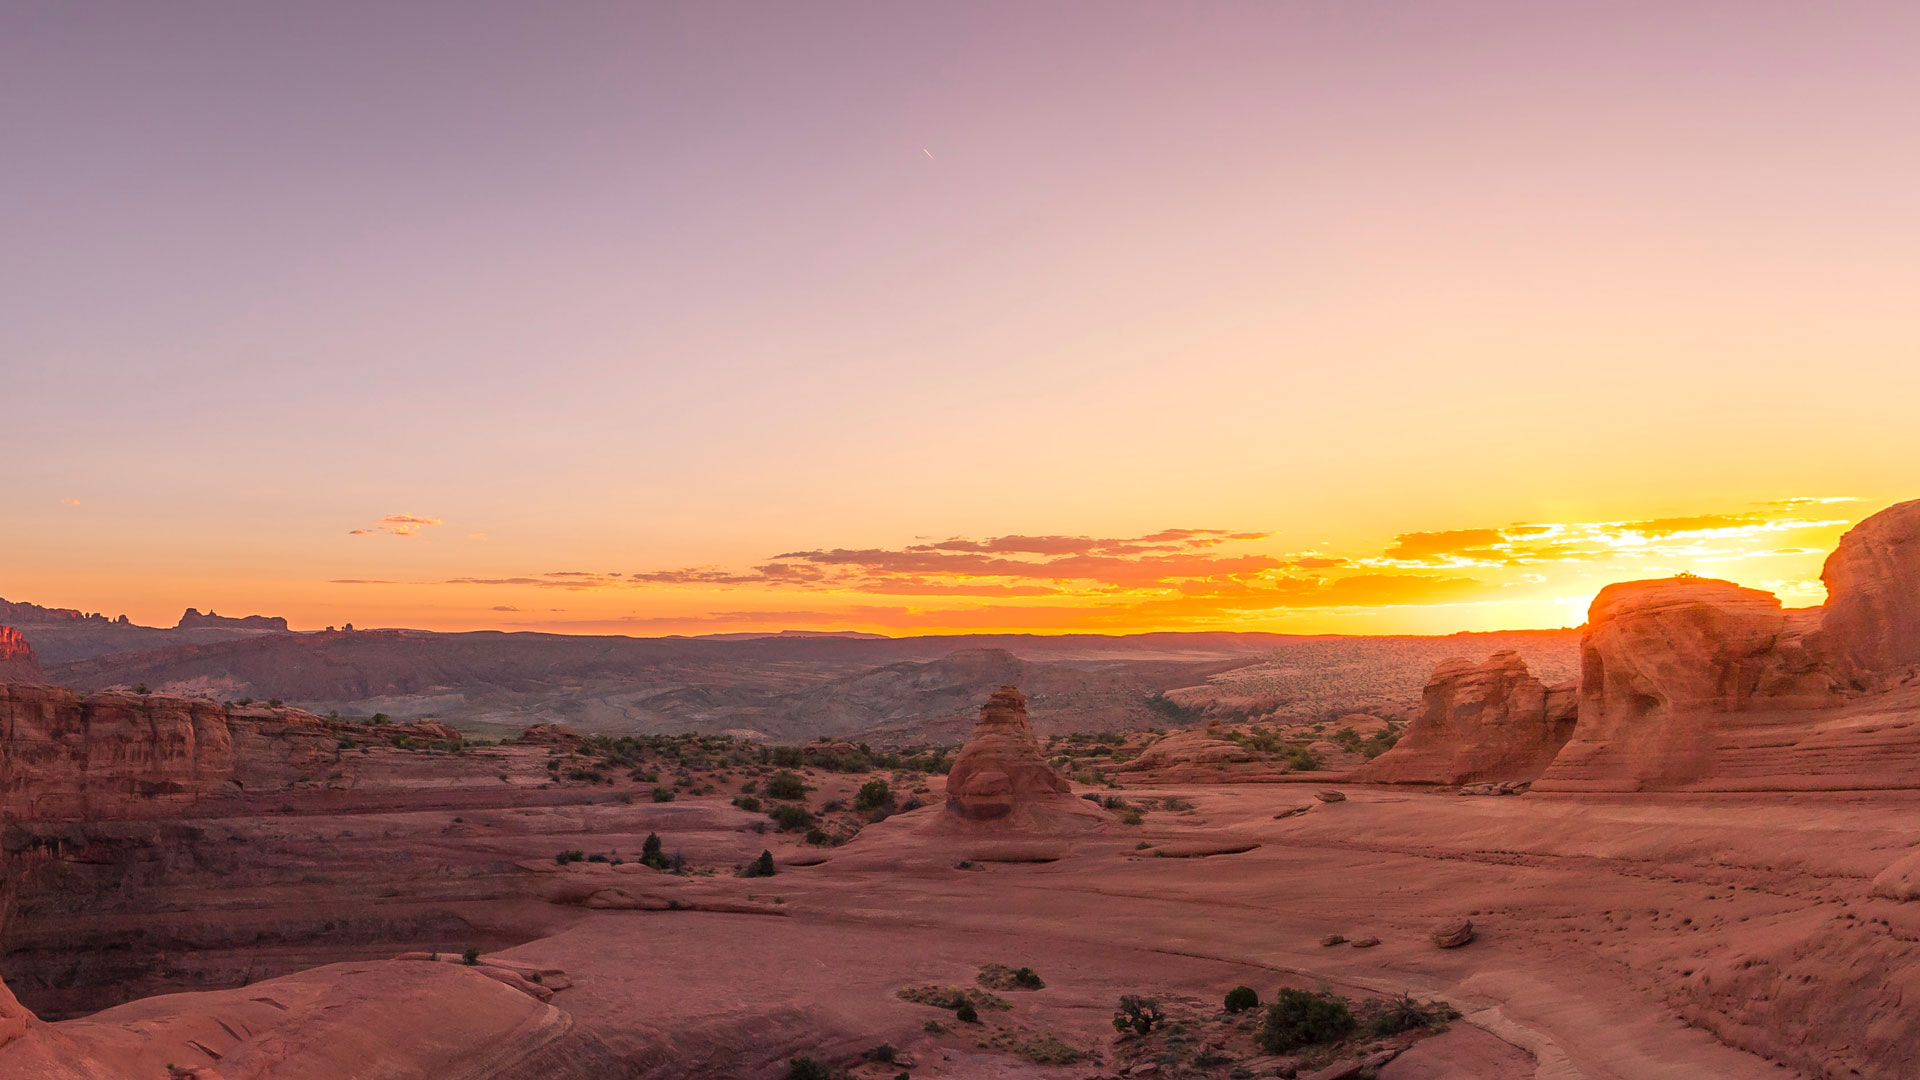 View of sun setting over Canyonlands National Park